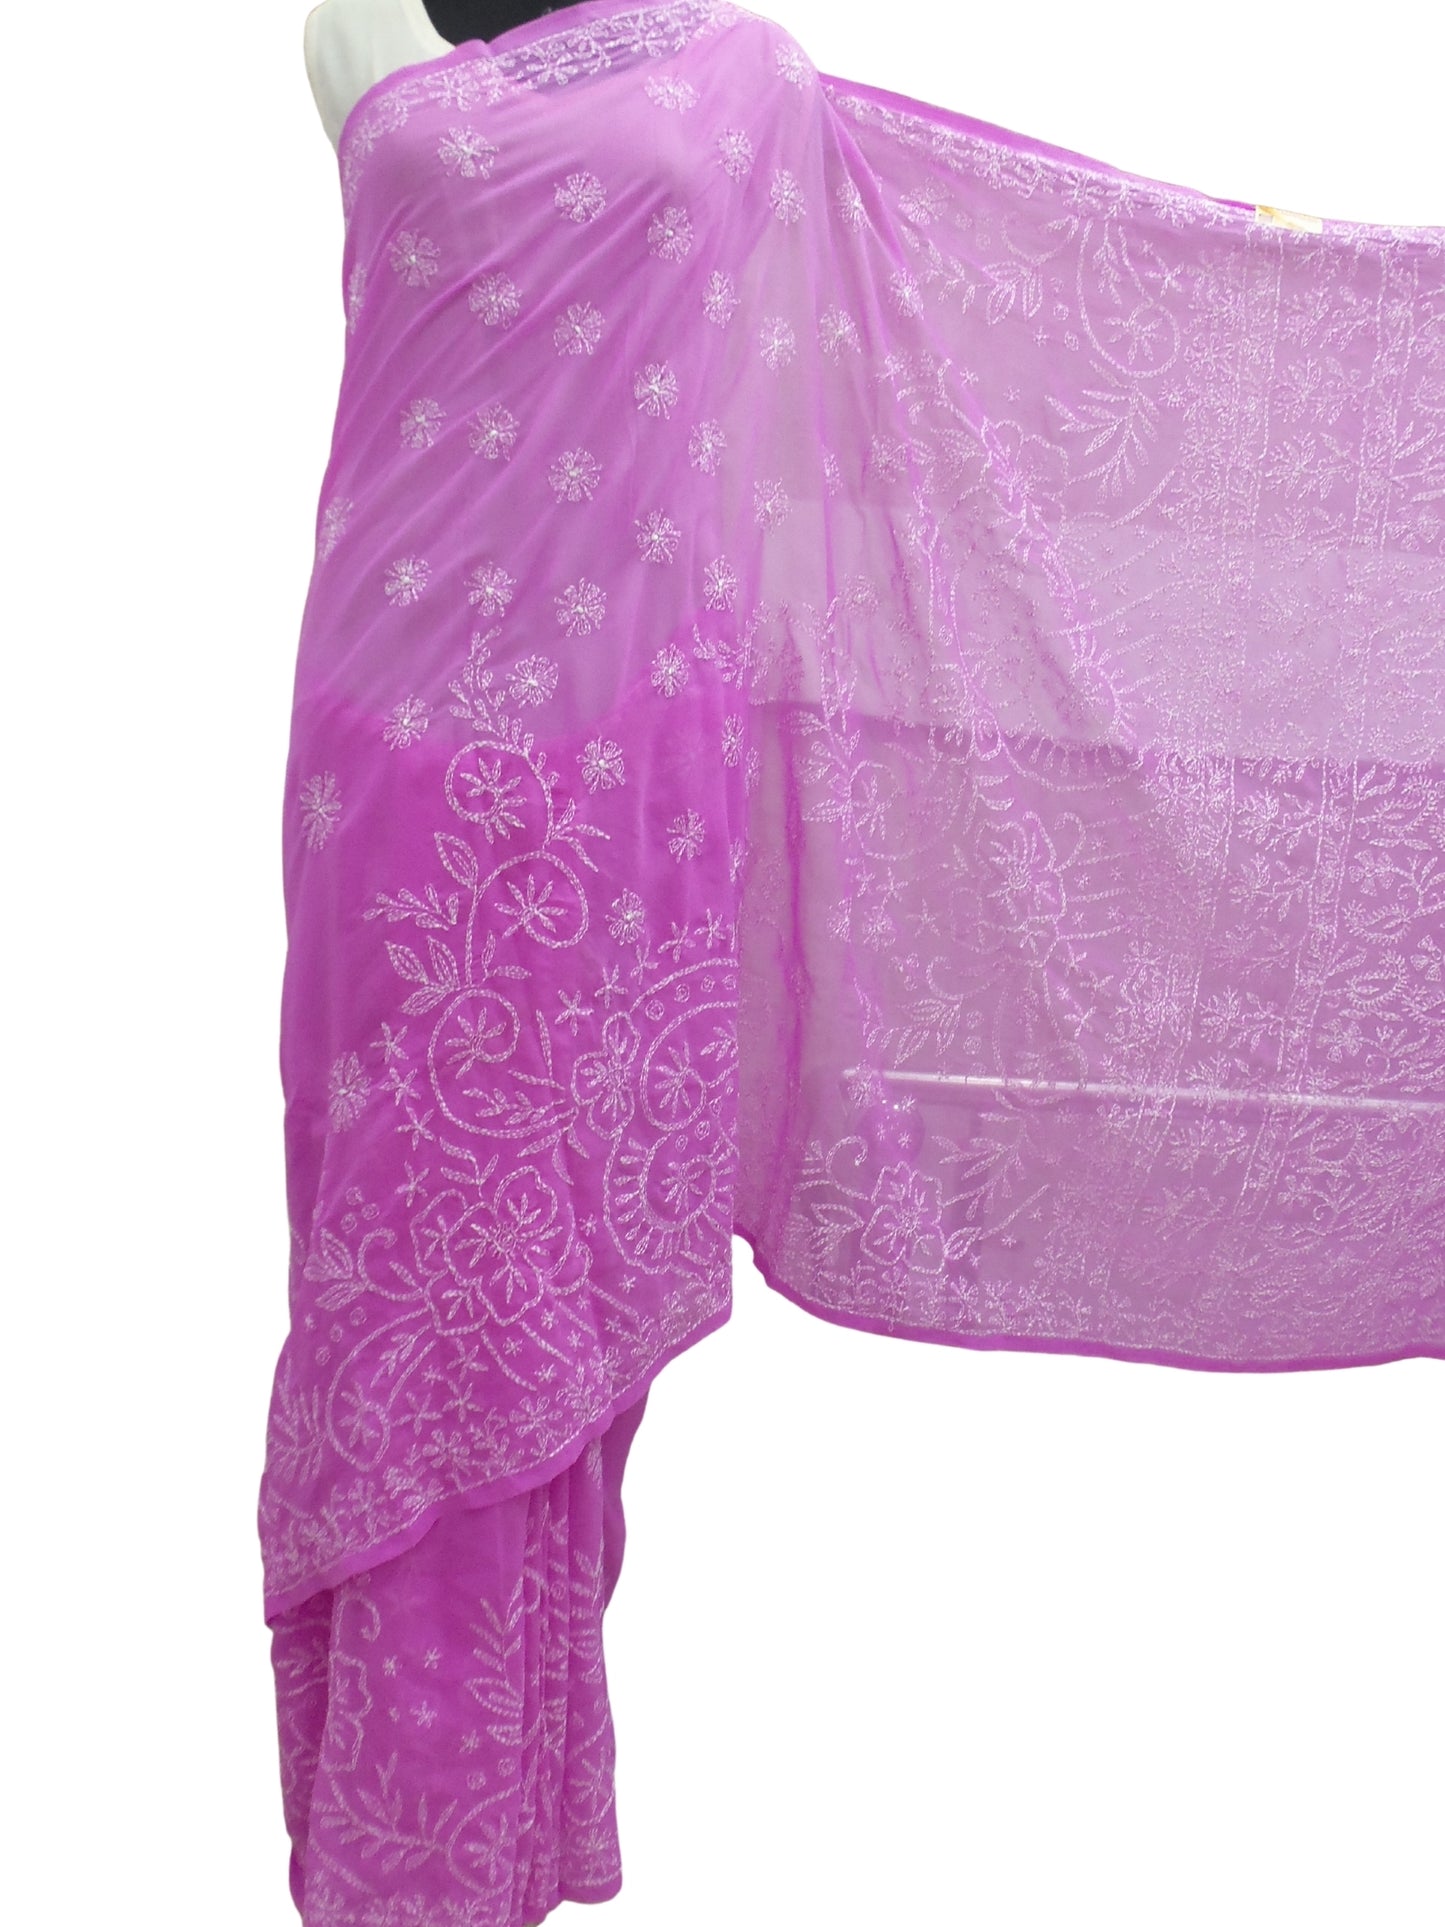 Shyamal Chikan Hand Embroidered Purple Georgette Lucknowi Chikankari Shaded Saree With Blouse Piece and Tepchi Work - S1173